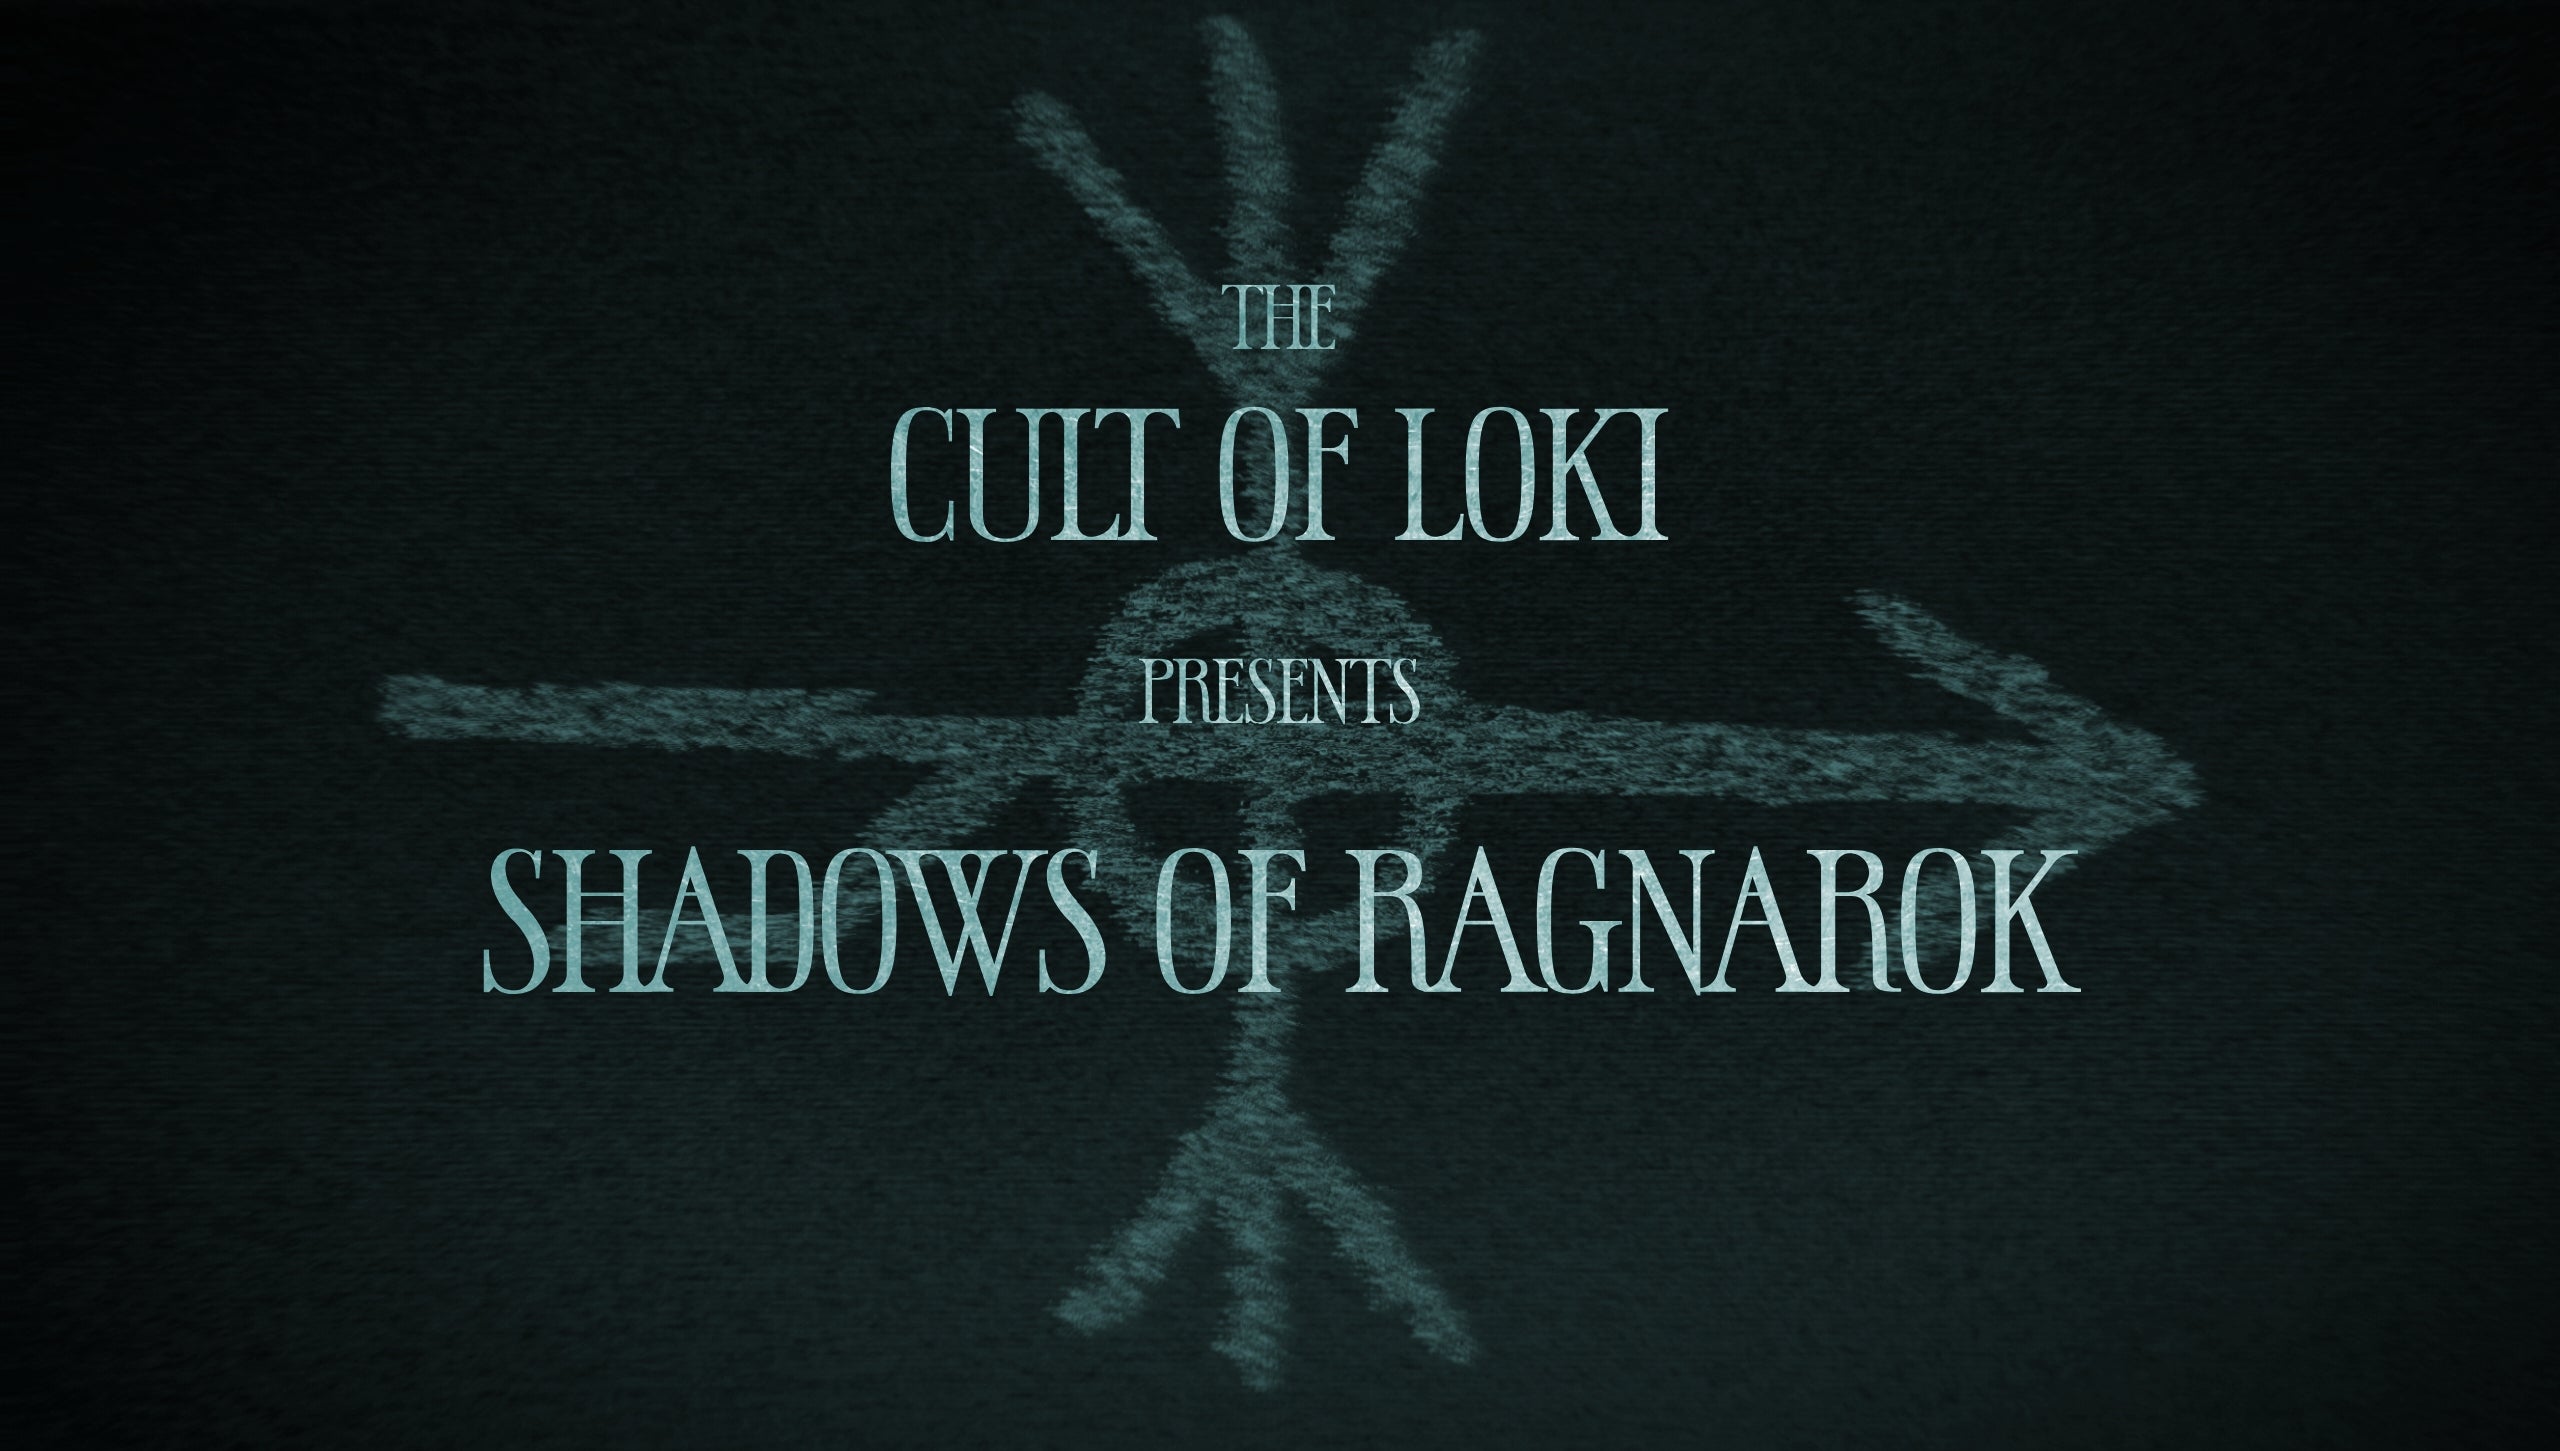 Load video: Cult of Loki Youtube Channel